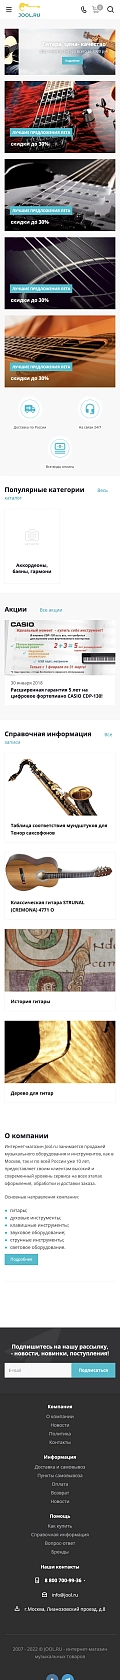 Online store of musical goods